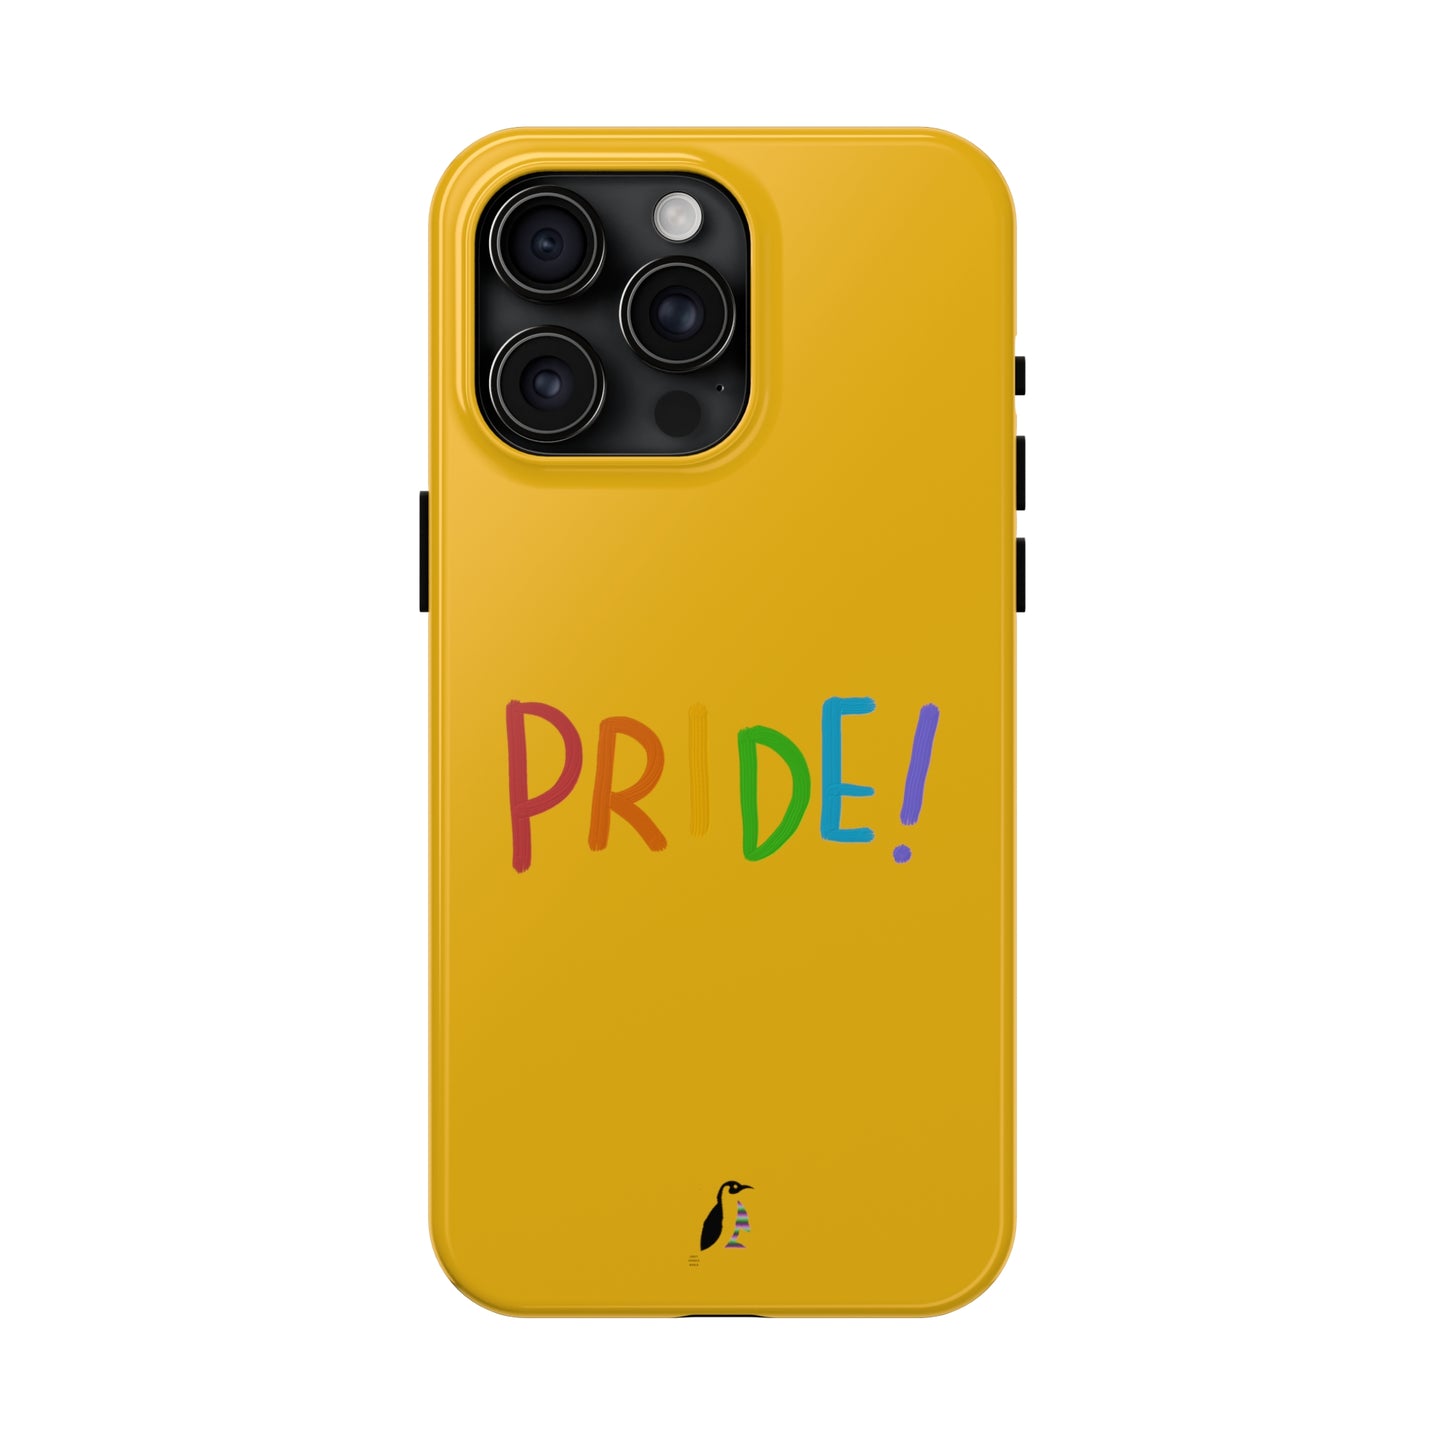 Tough Phone Cases (for iPhones): LGBTQ Pride Yellow